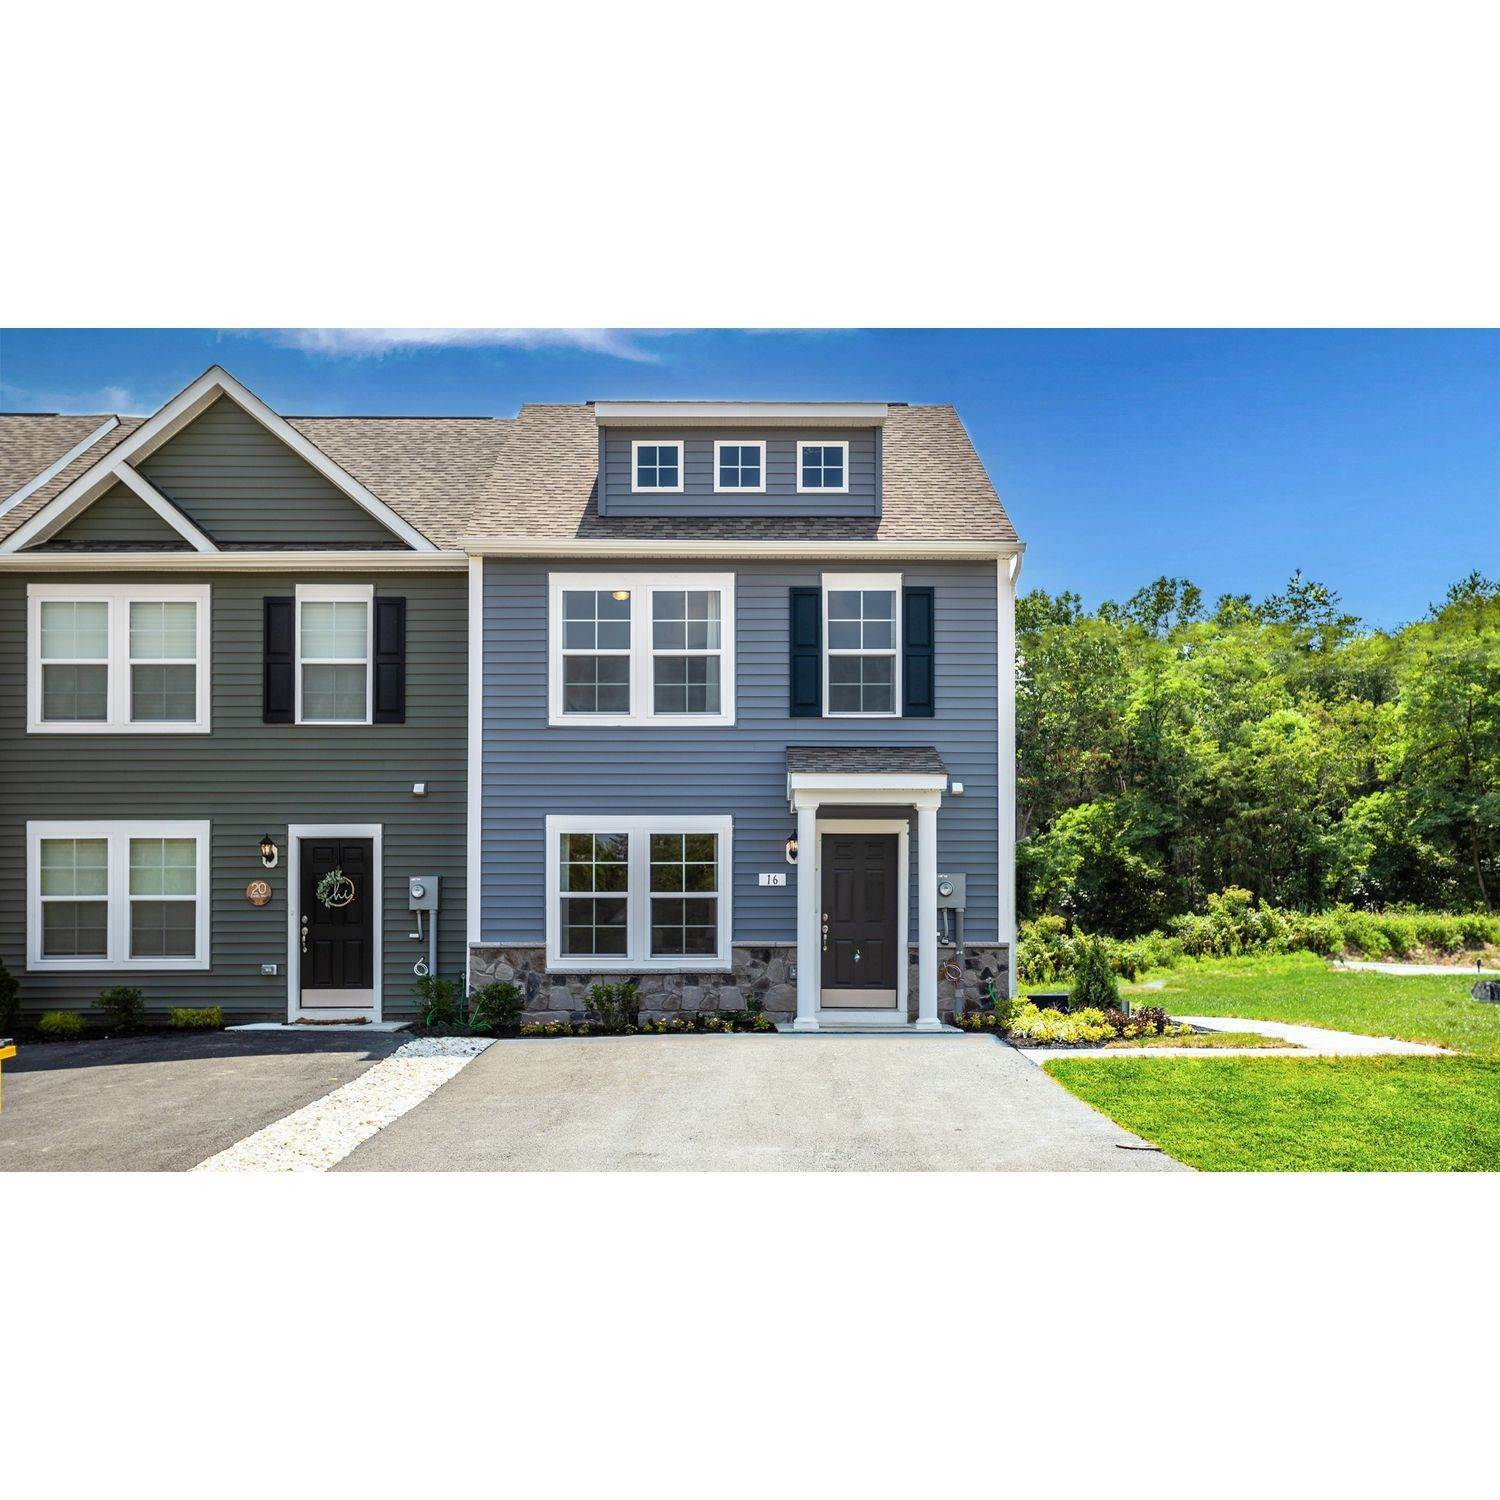 2. 16 Loblolly Drive, Bunker Hill, WV 25413에 Whispering Pines Townhomes 건물